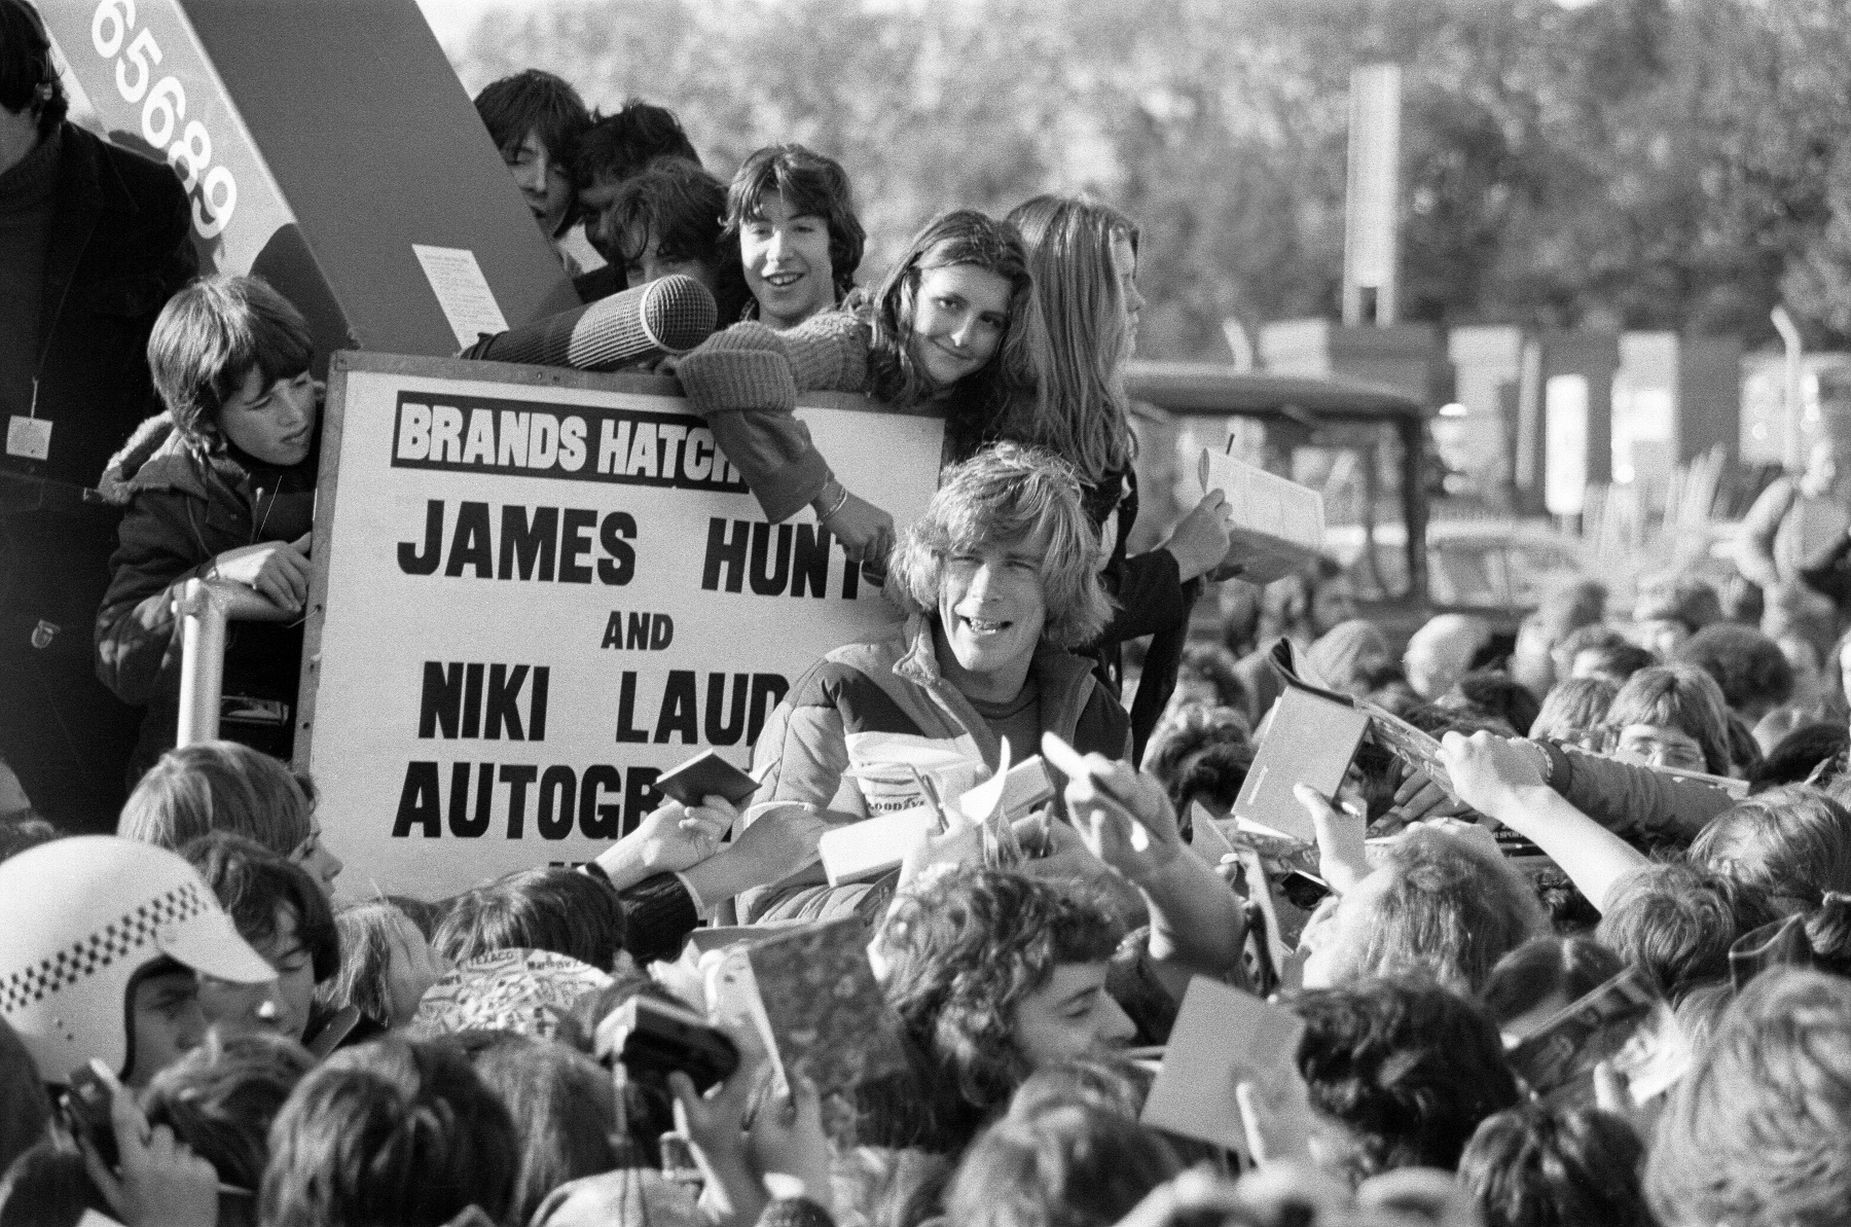 November 08, 1976, Kent, England. James Hunt, the new World Racing Champion, is besieged by thousands of young autograph hunters at Brands Hatch.